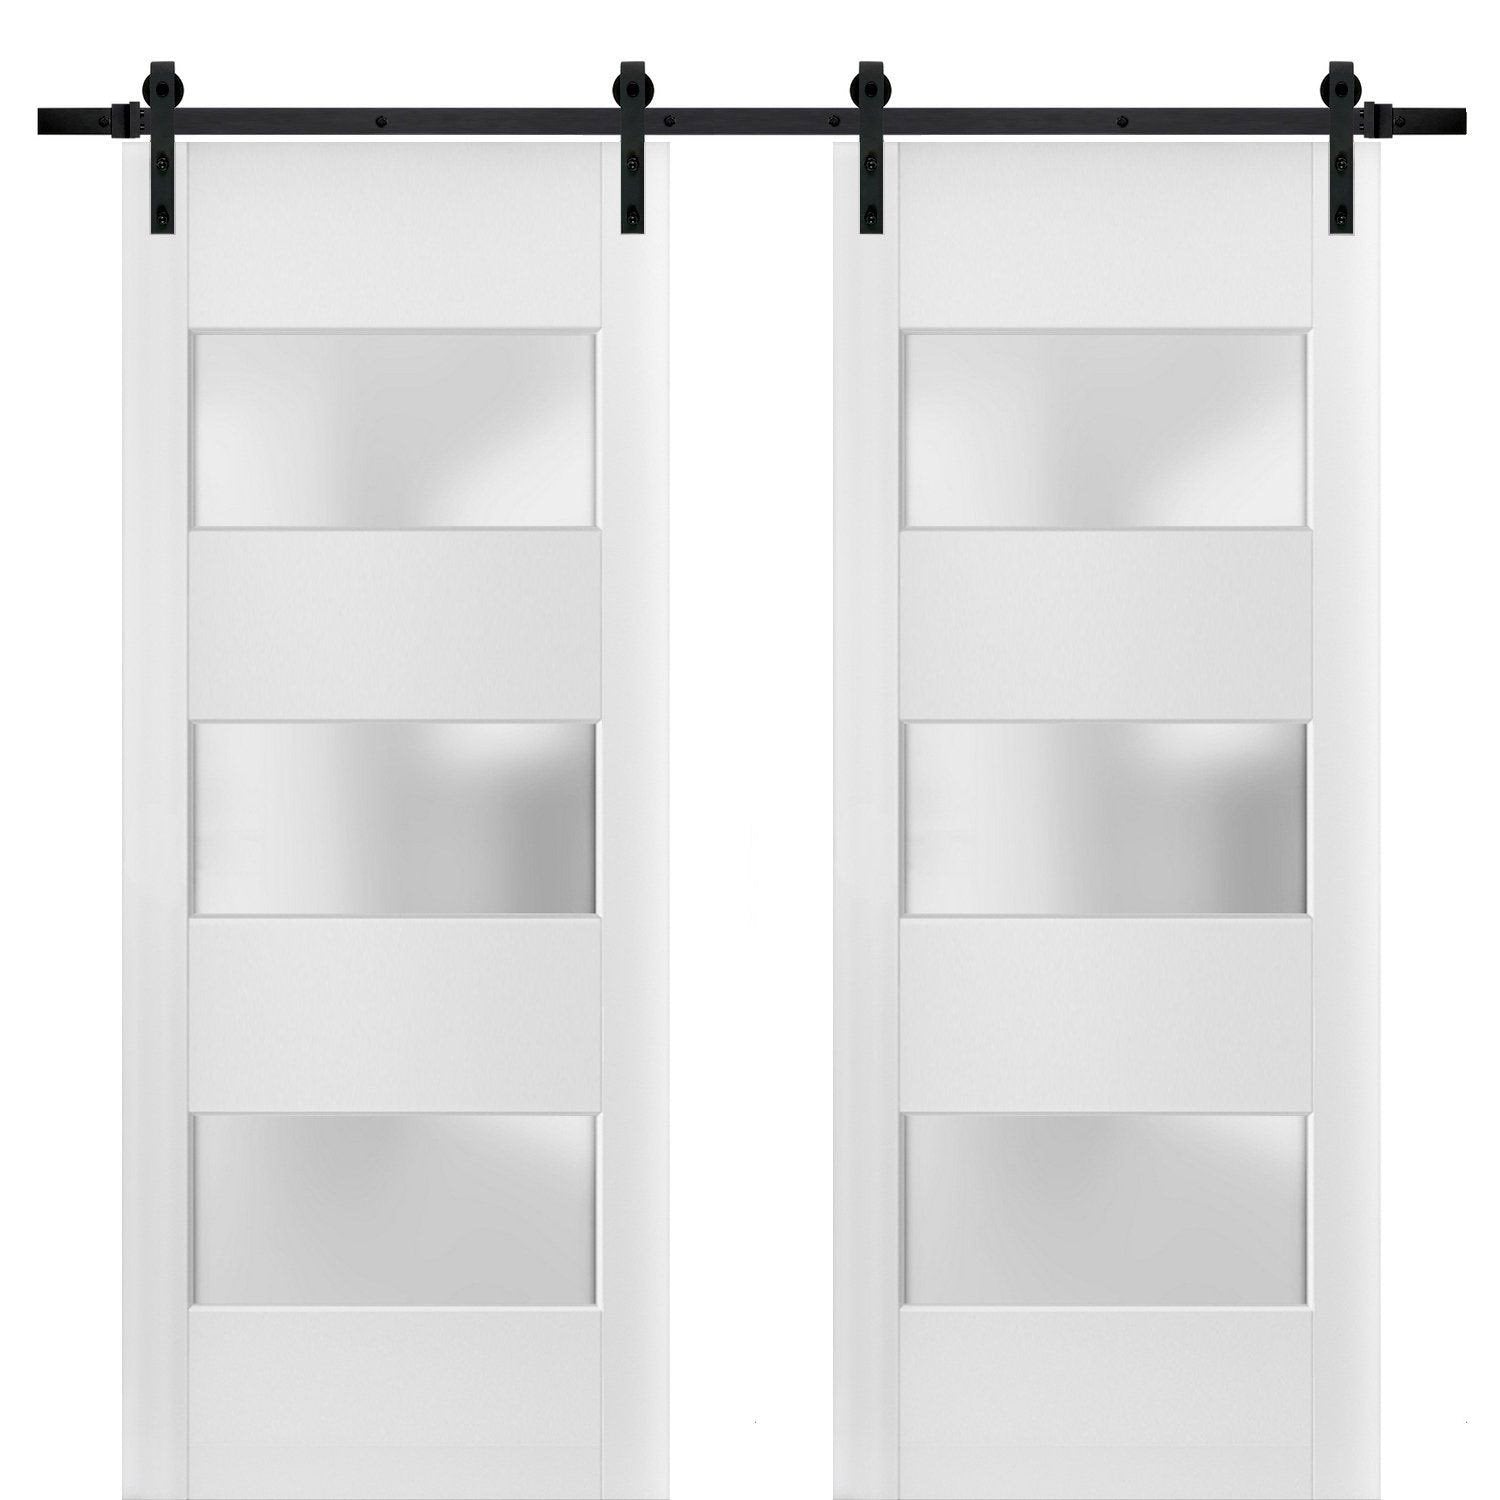 Lucia 4070 White Silk Double Barn Door with 3 Lites Frosted Glass | Black Rail